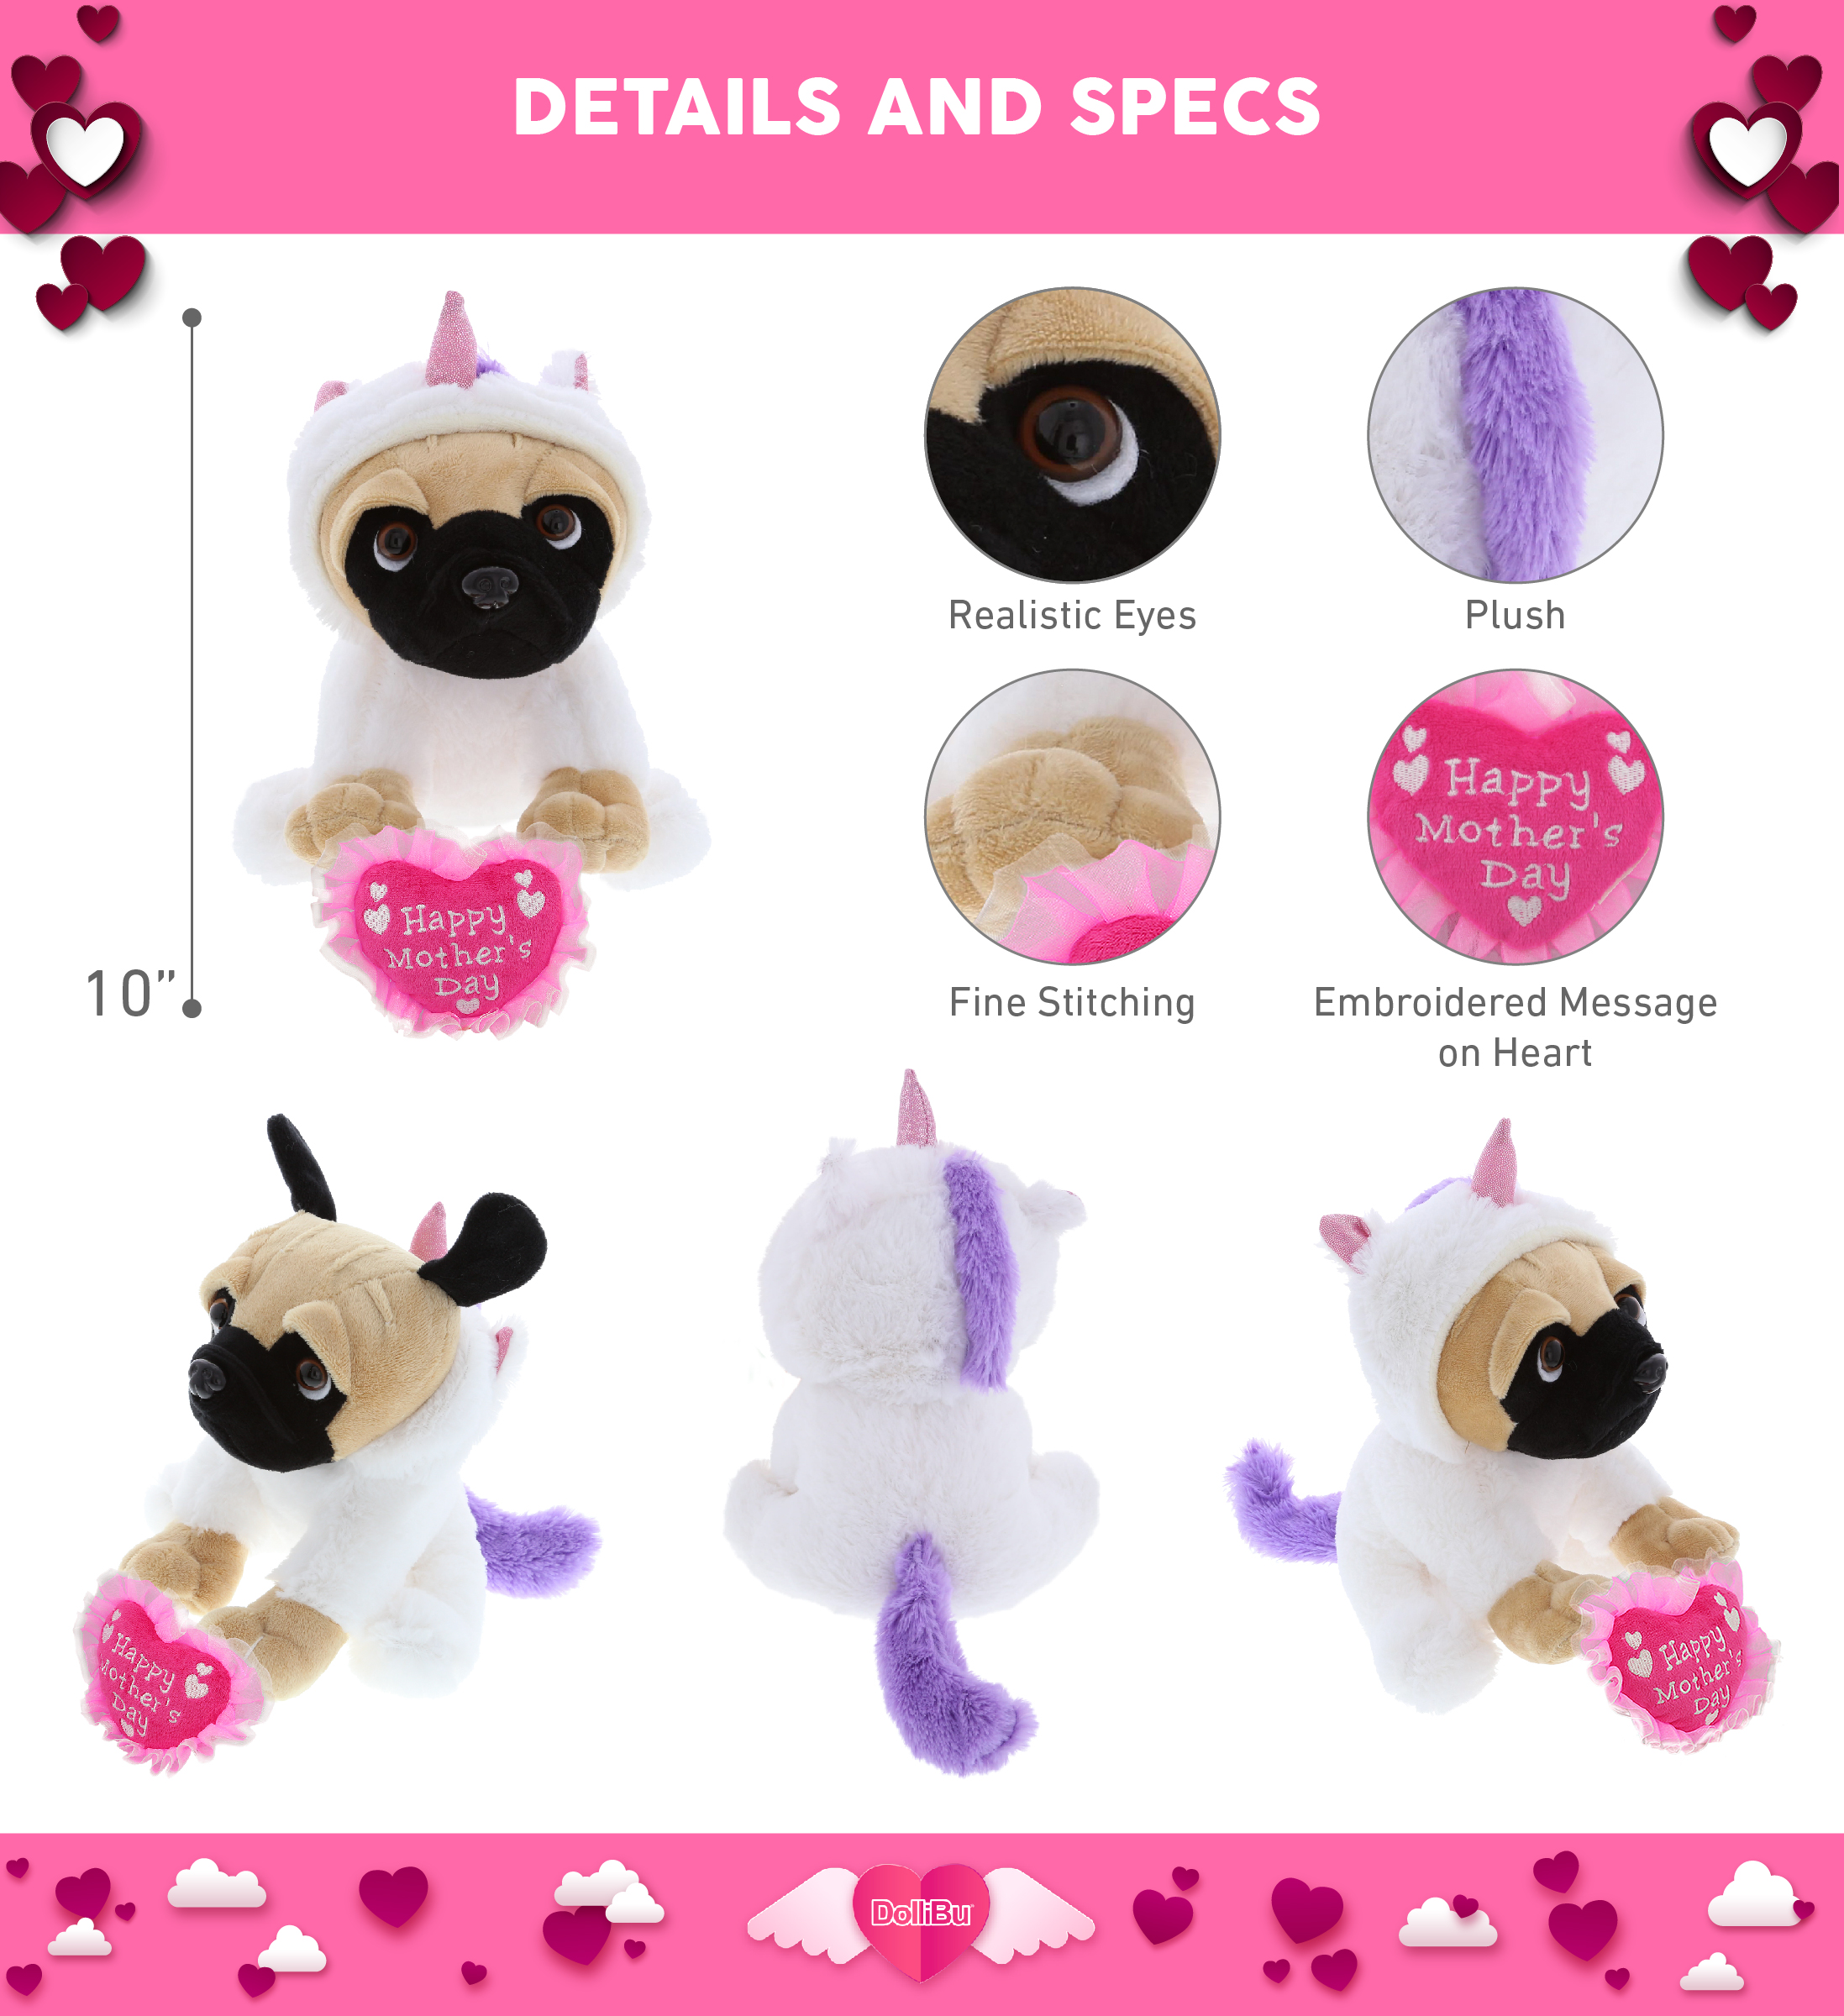 DolliBu Happy Mother's Day Super Soft Pug Dog Unicorn Plush Figure - Stuffed Animal with Pink Heart Message for Best Mommy, Grandma, Wife, Daughter - Dog Pet with Unicorn Costume Plush Toy - 6.5" Inch - image 2 of 6